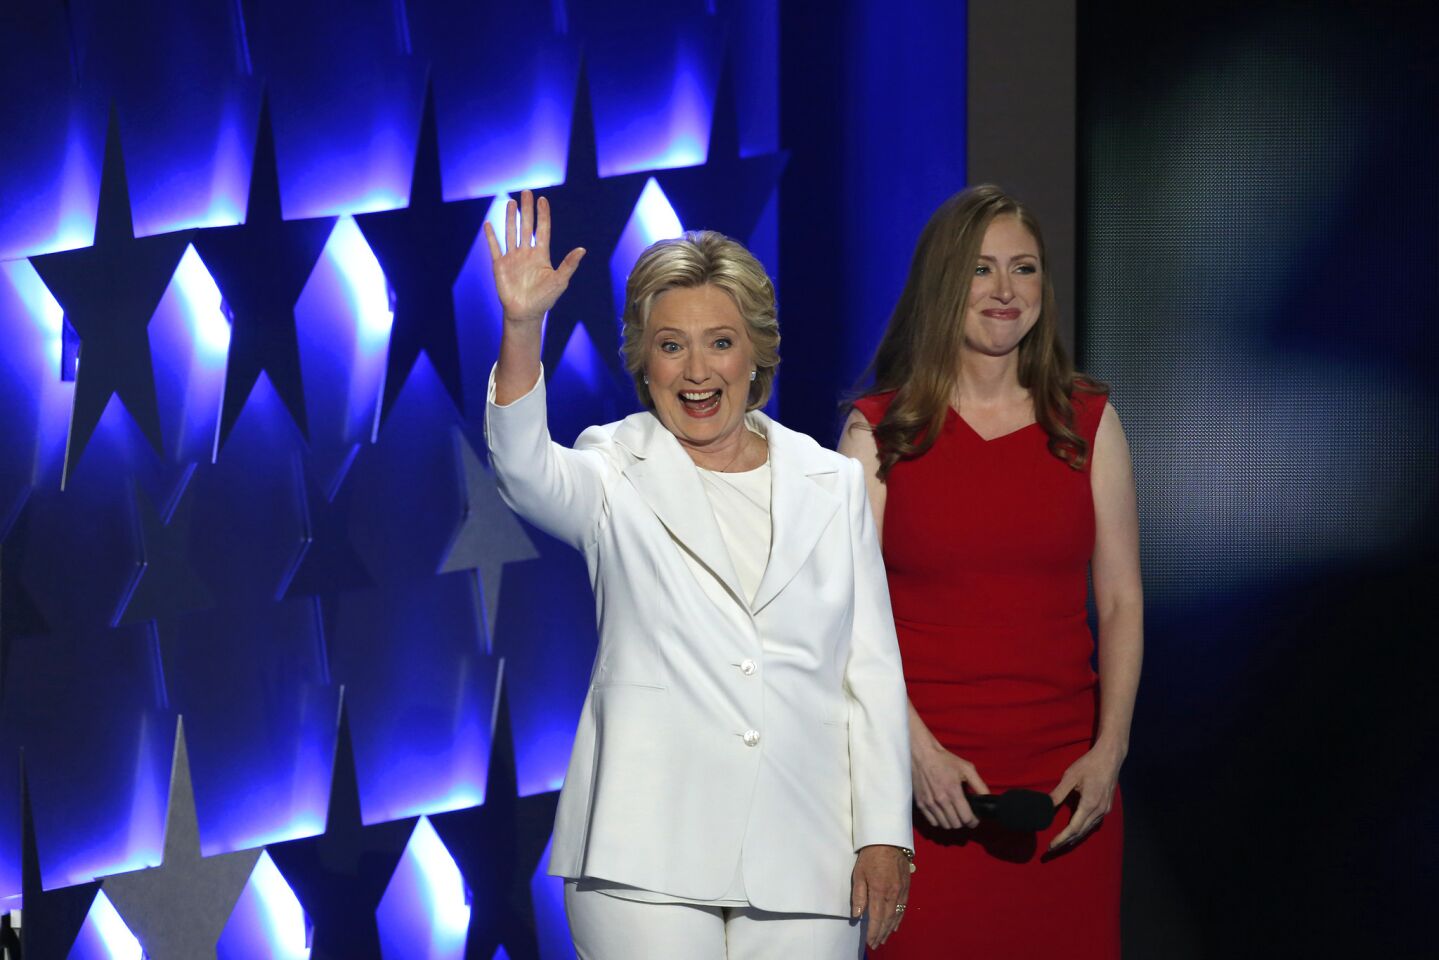 Hillary Clinton enters after her daughter Chelsea Clinton introduces her on the final night of the Democratic National Convention in Philadelphia.